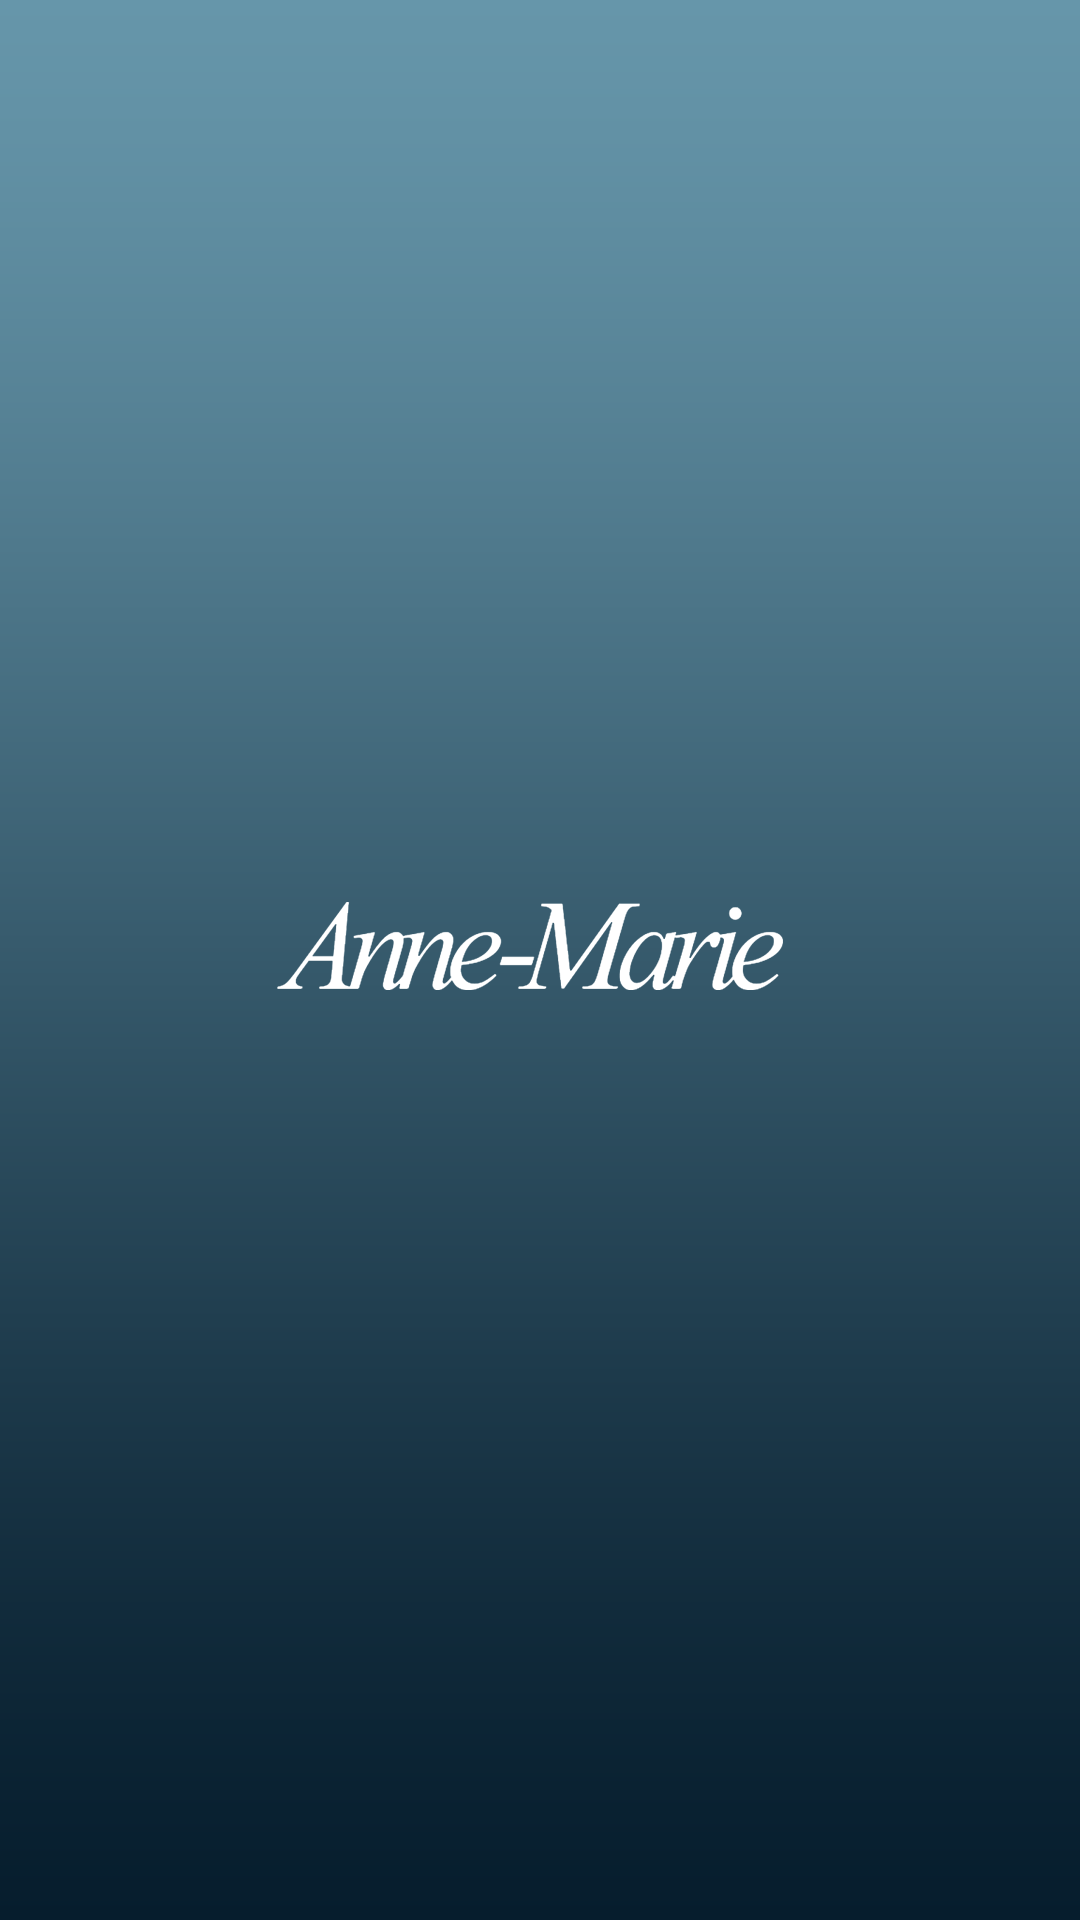 ANNE-MARIE.png